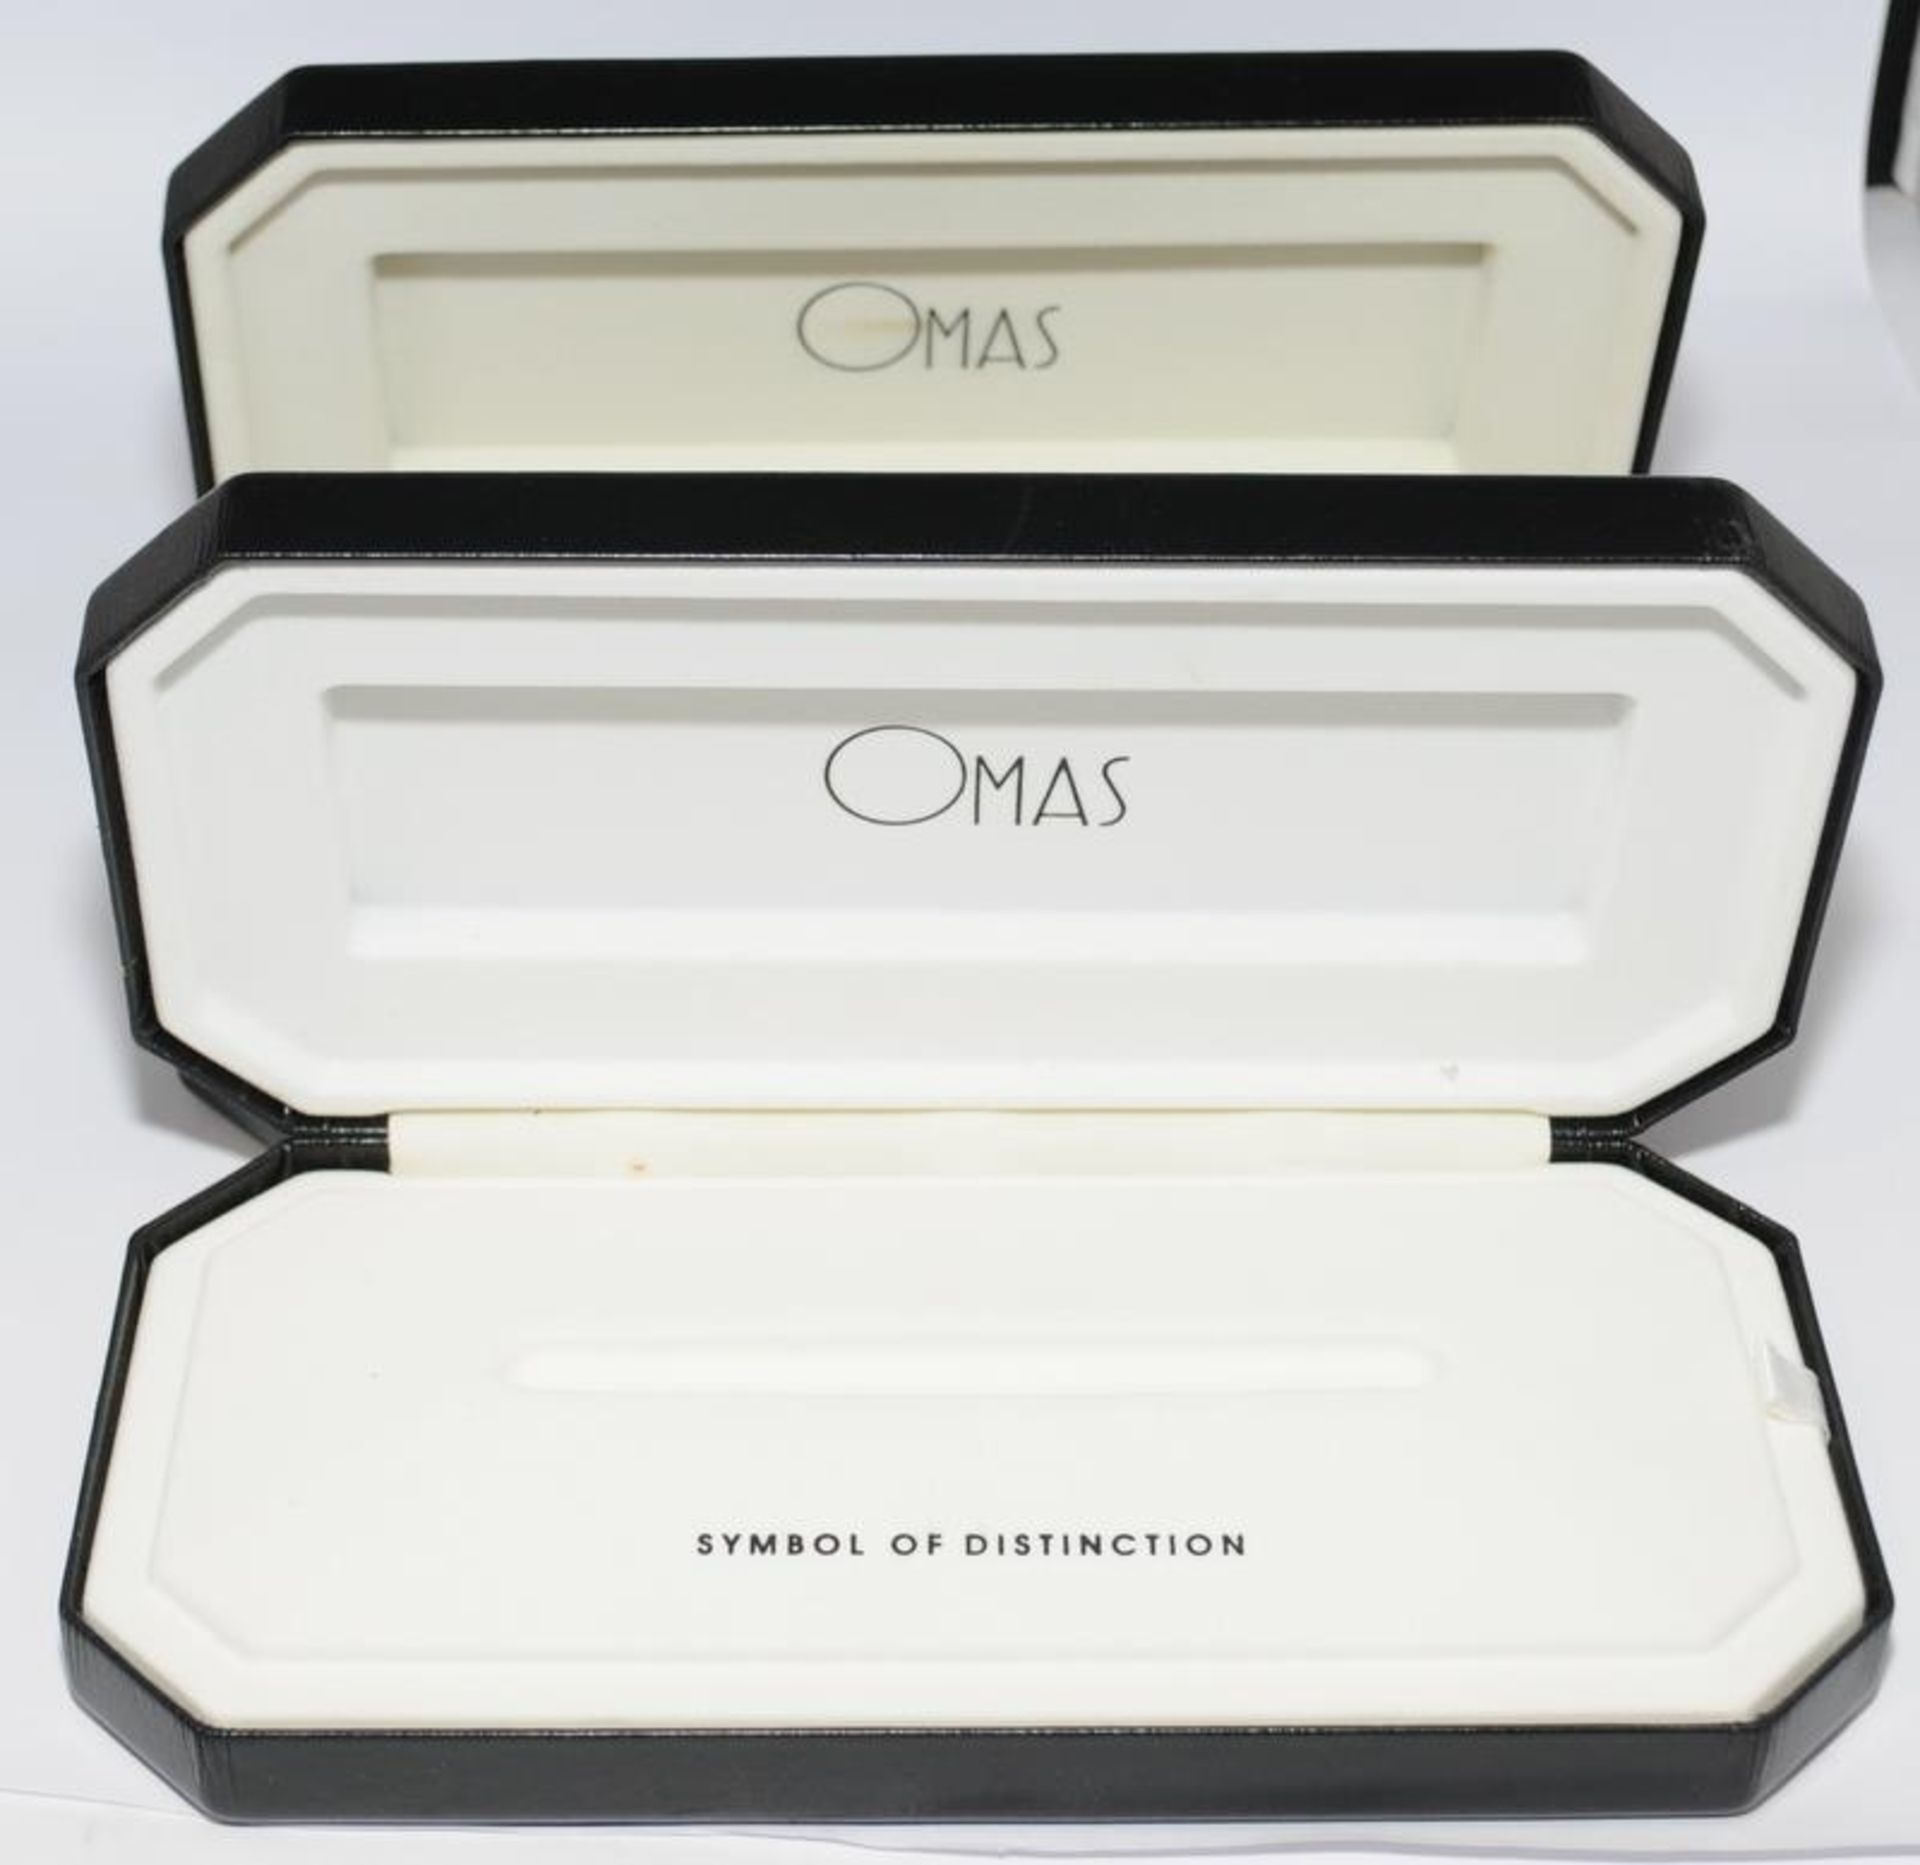 Two genuine Omas 360 pen boxes complete with certificates and user guides - Image 2 of 3